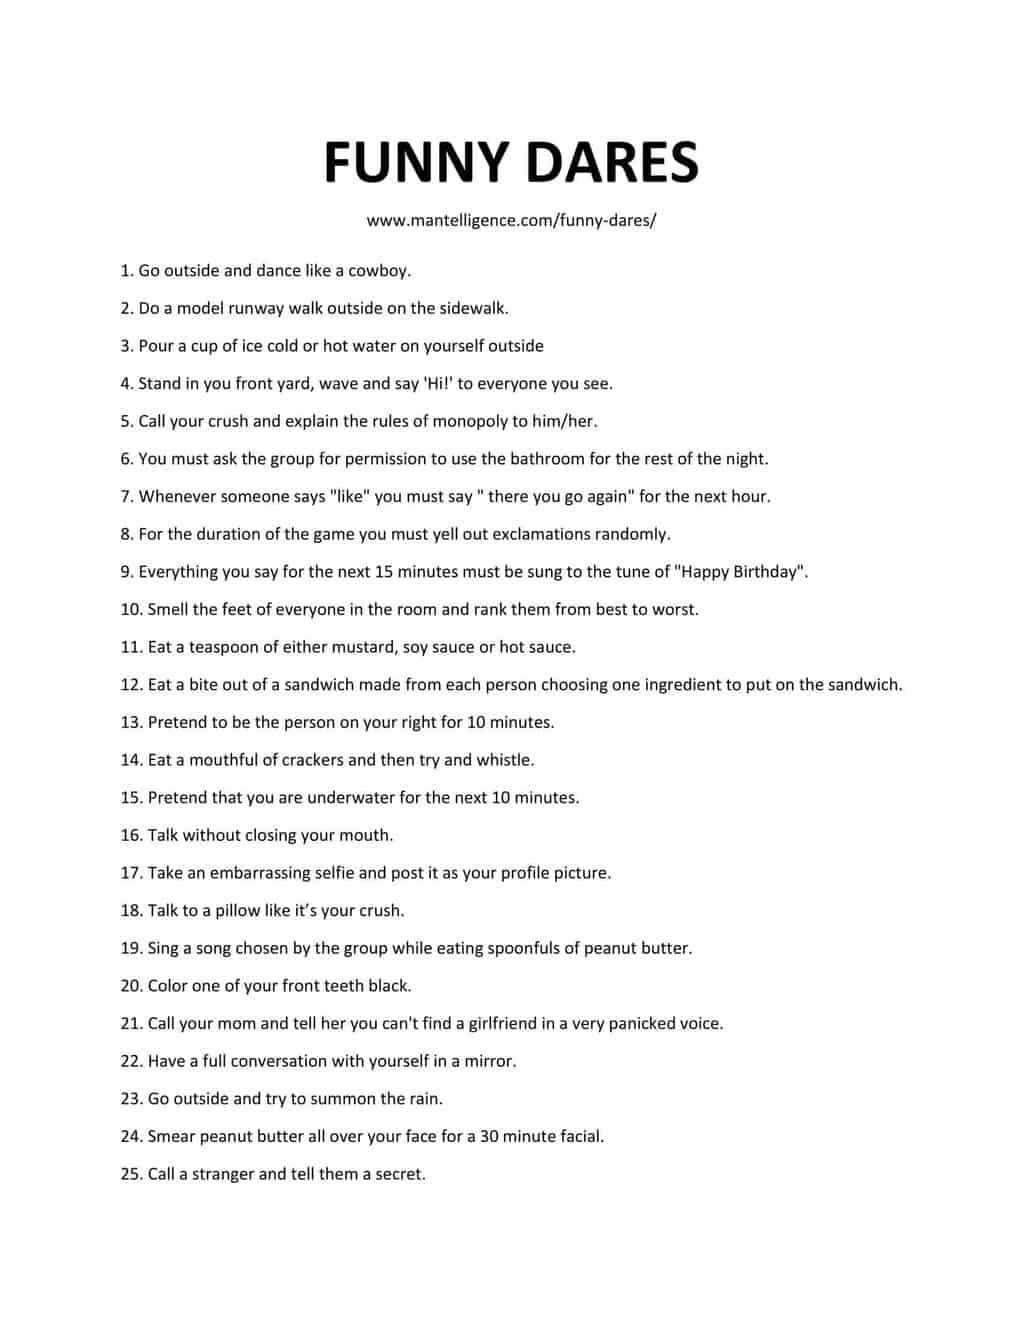 Downloadable list of funny dares